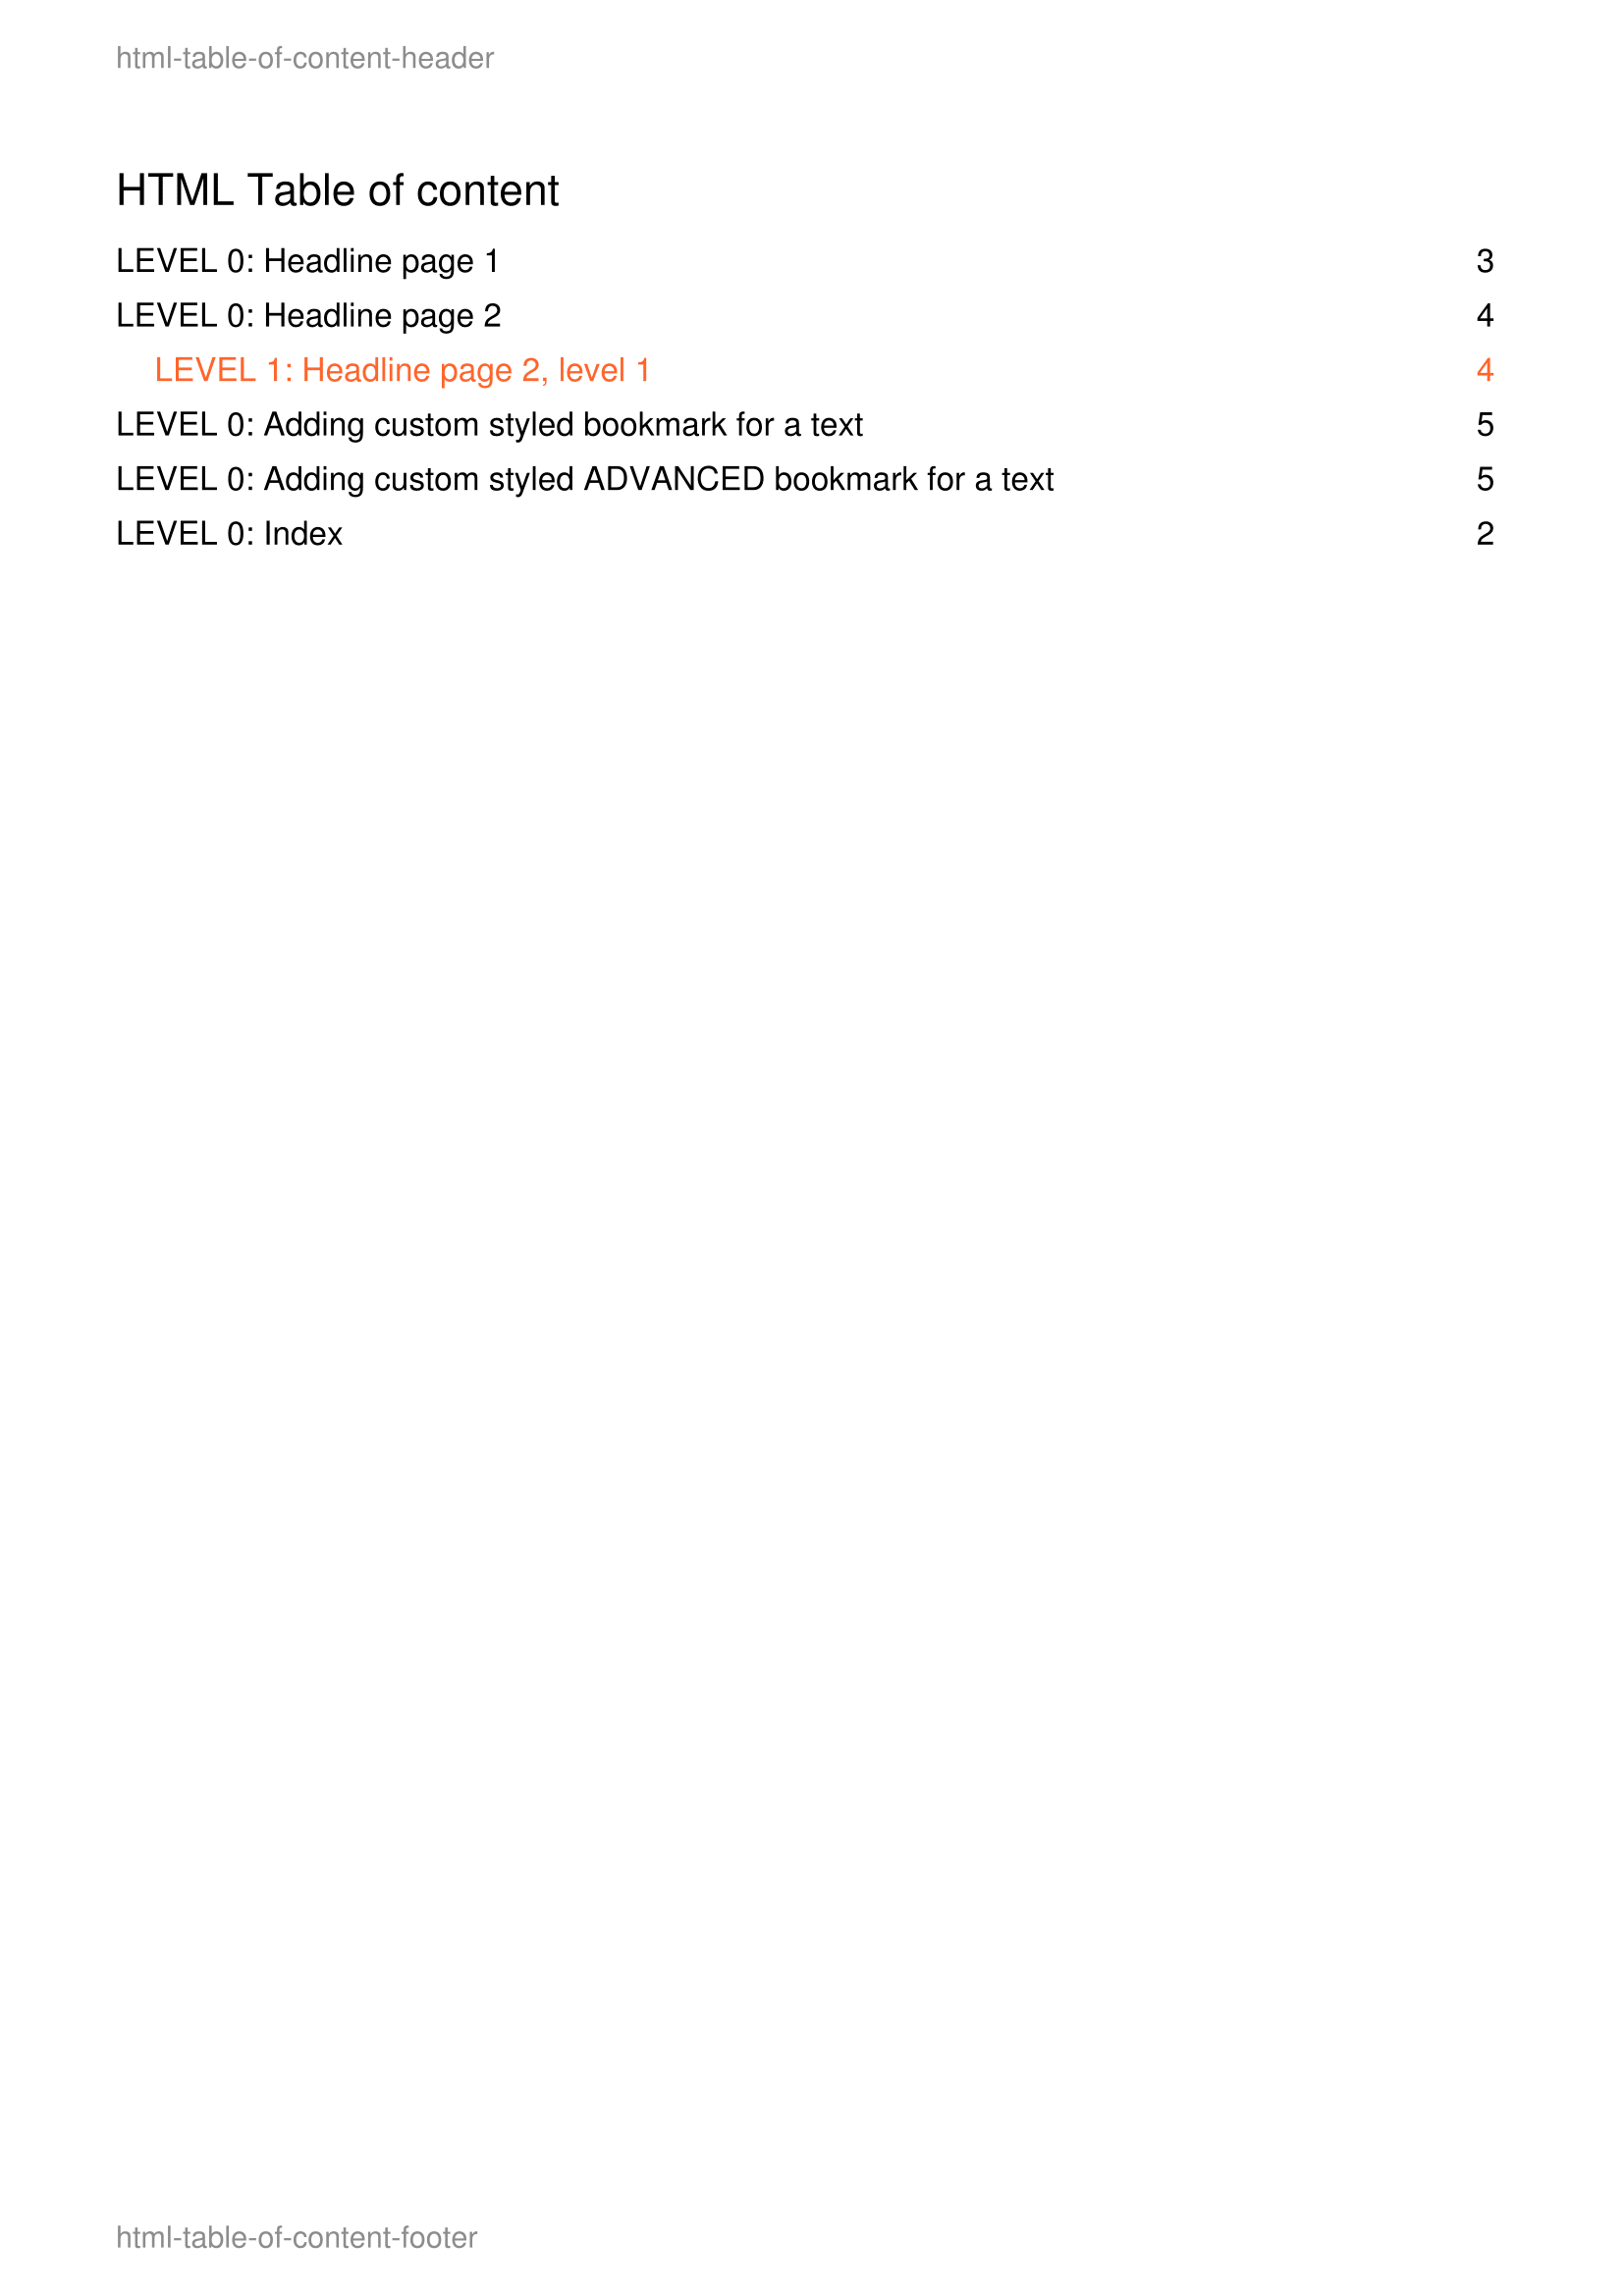 Table of content example output